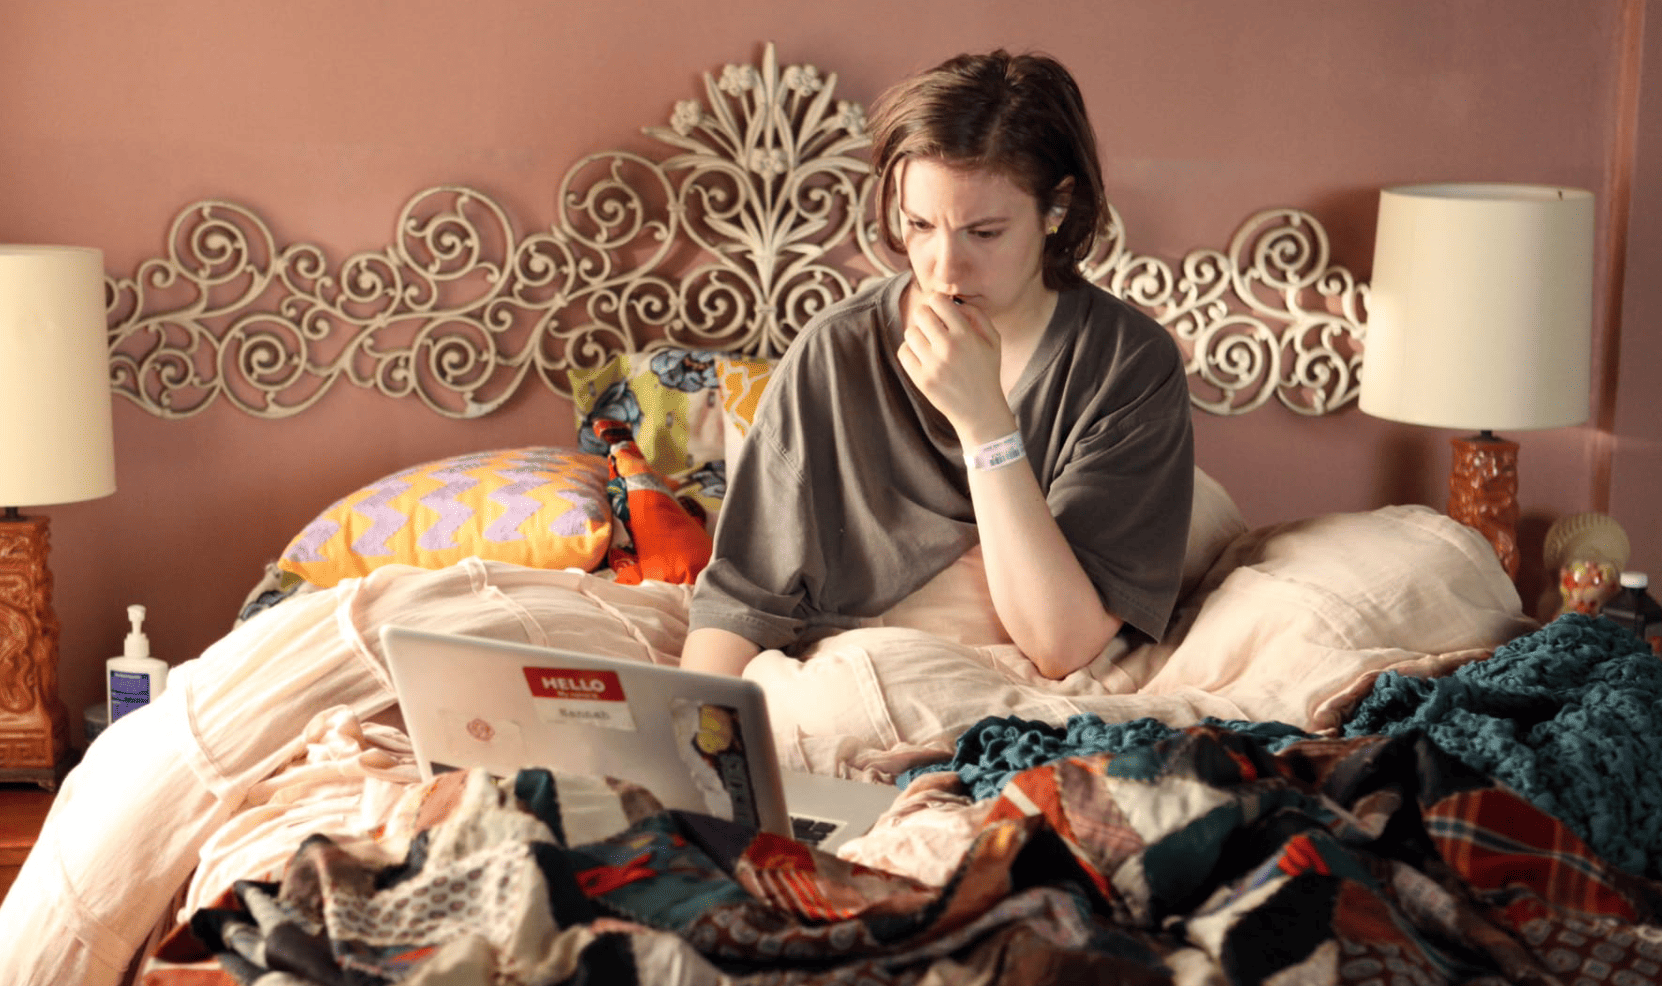 Lena Dunham looking stressed while sitting with her laptop in her messy bed in this image from Apatow Productions